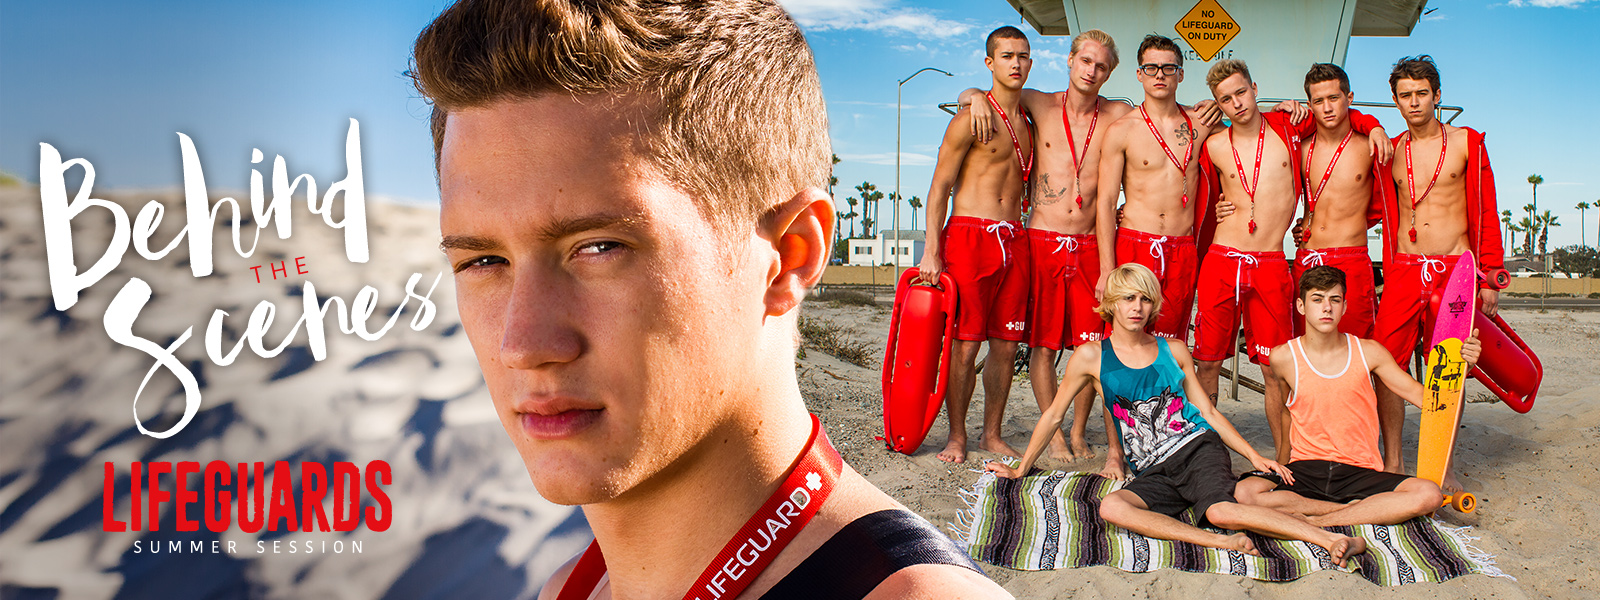 Lifeguards: Joey Mills & other helix naked twinks have sex on the beach in this series